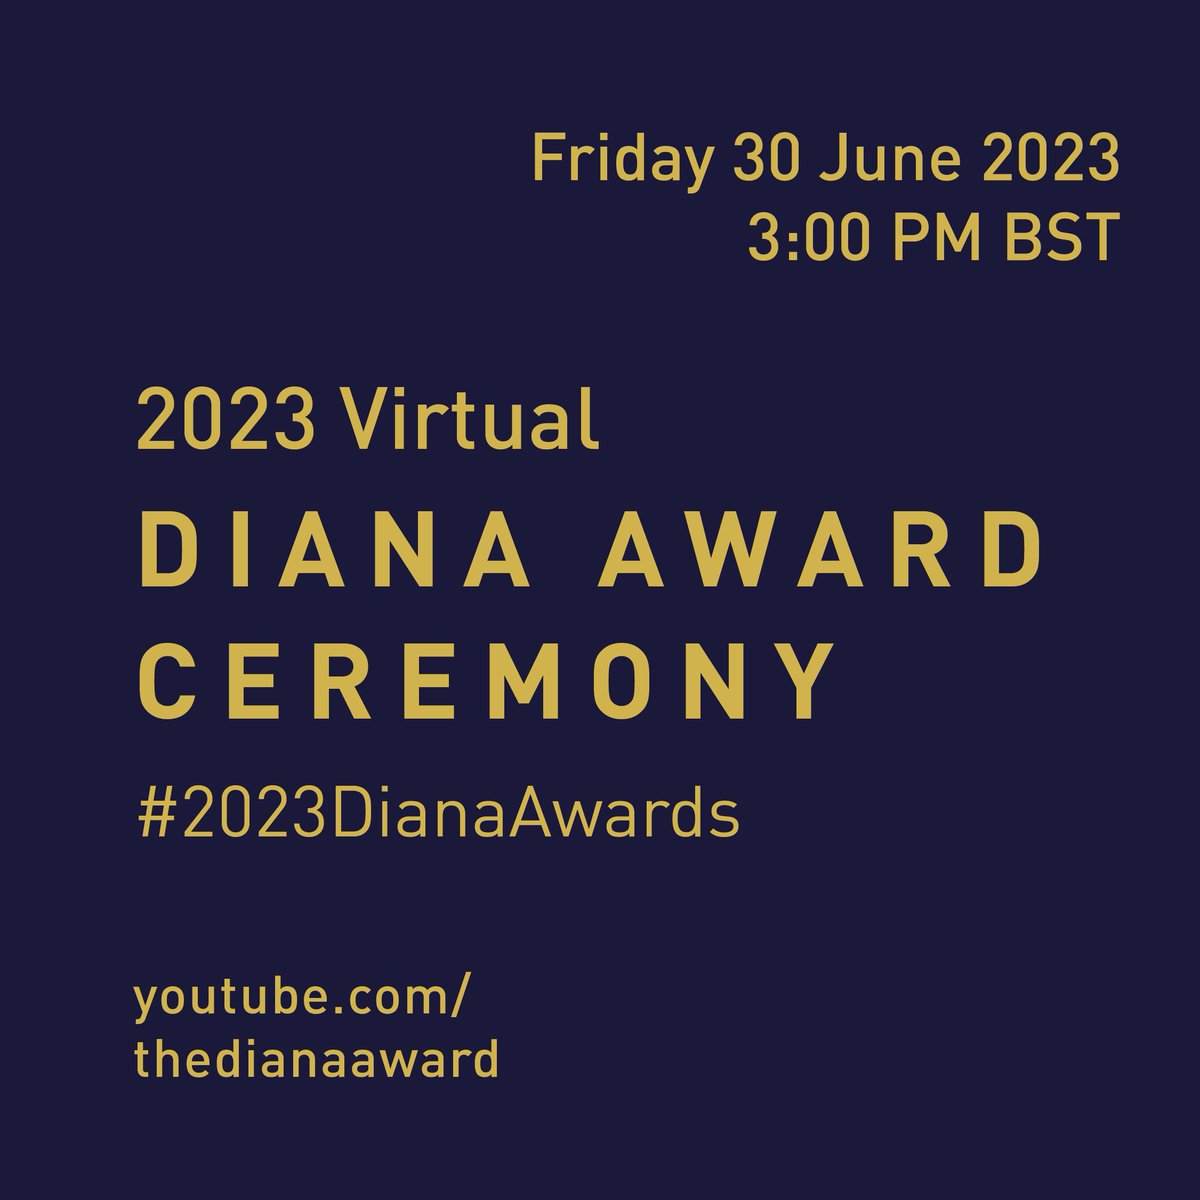 The #2023DianaAwards Ceremony is in a few hours. To get a free ticket to the event visit eventbrite.co.uk/e/2023-virtual…  and join in celebrating young changemakers from across the globe.